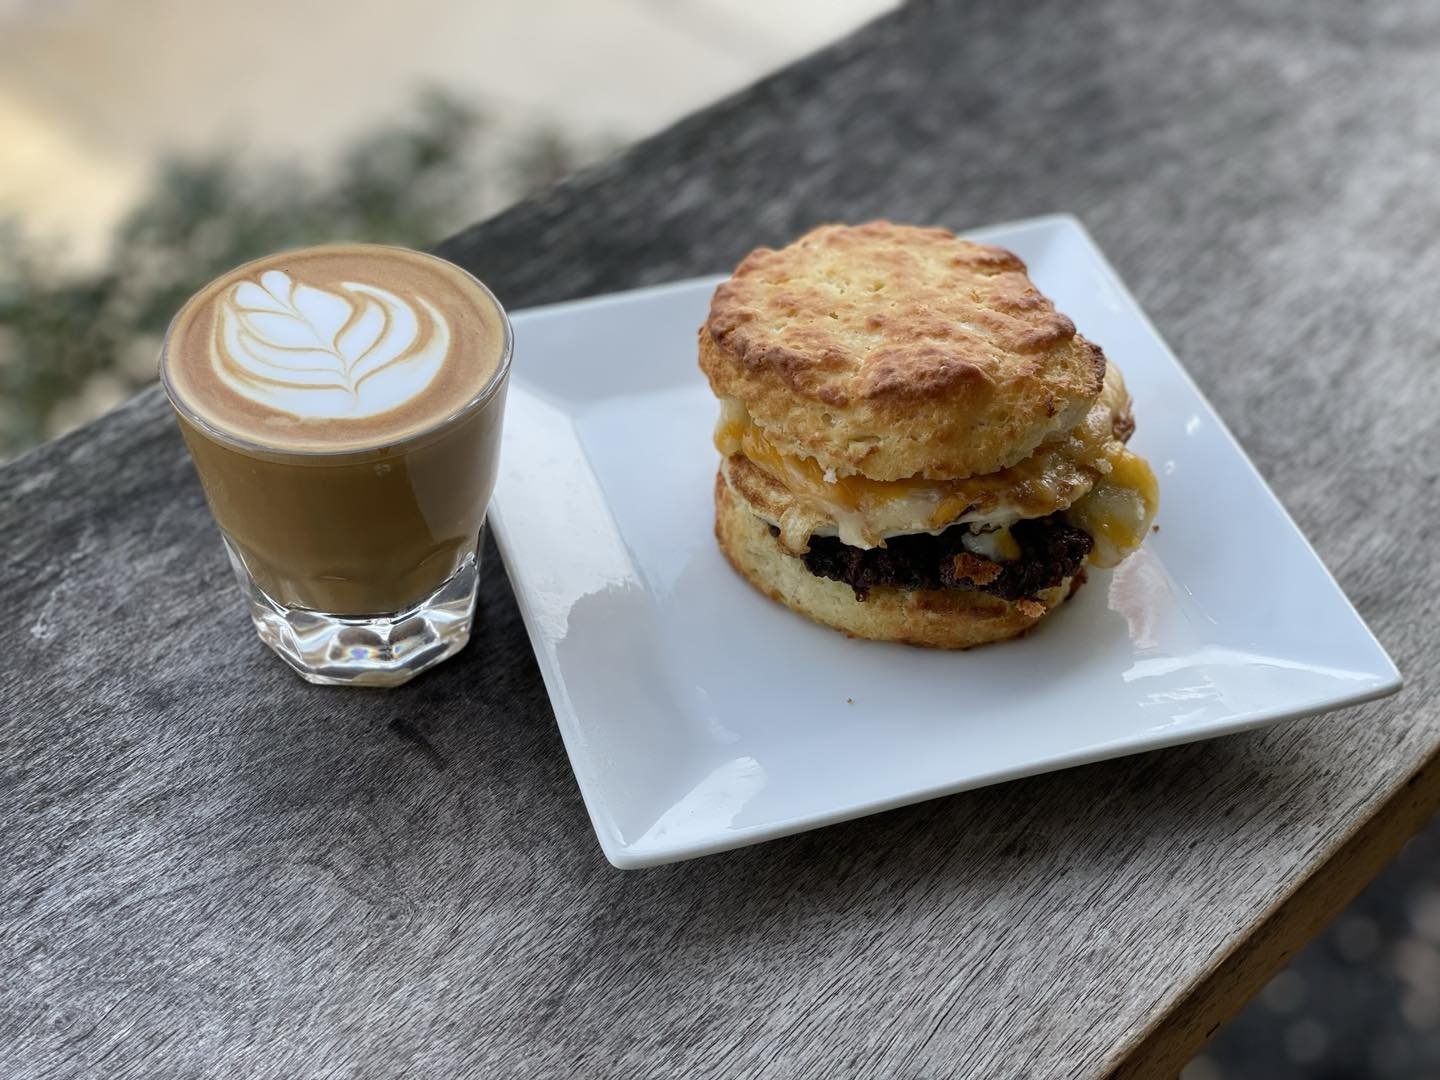 hellloooooo friday 🙌

go ahead and go for the breve cortado and the extra cheese on your breakfast sandwich. you earned it 😉

#friday #fridayfeeling #fridayvibes #breve #cortado #biscuit #biscuitsandwich #breakfastsandwich #breakfastsandwiches #mor